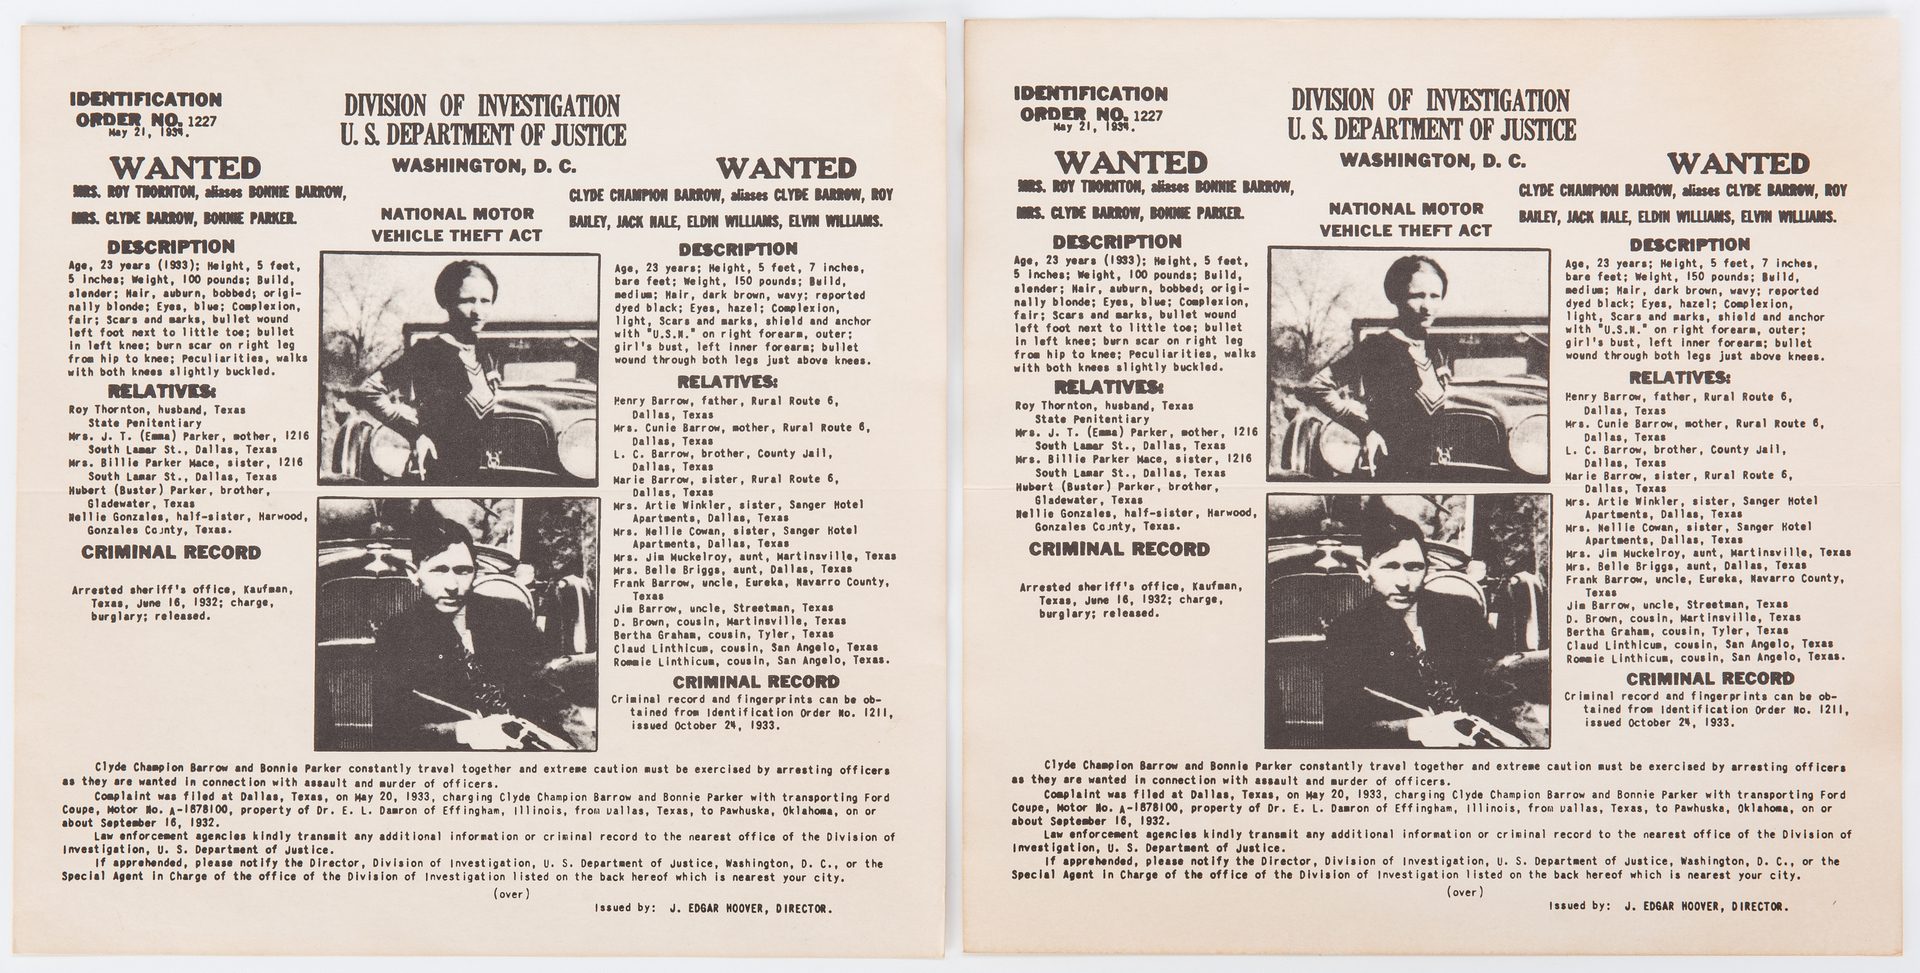 Lot 708: 3 "Wanted" Posters, incl. Bonnie and Clyde, John Dillinger